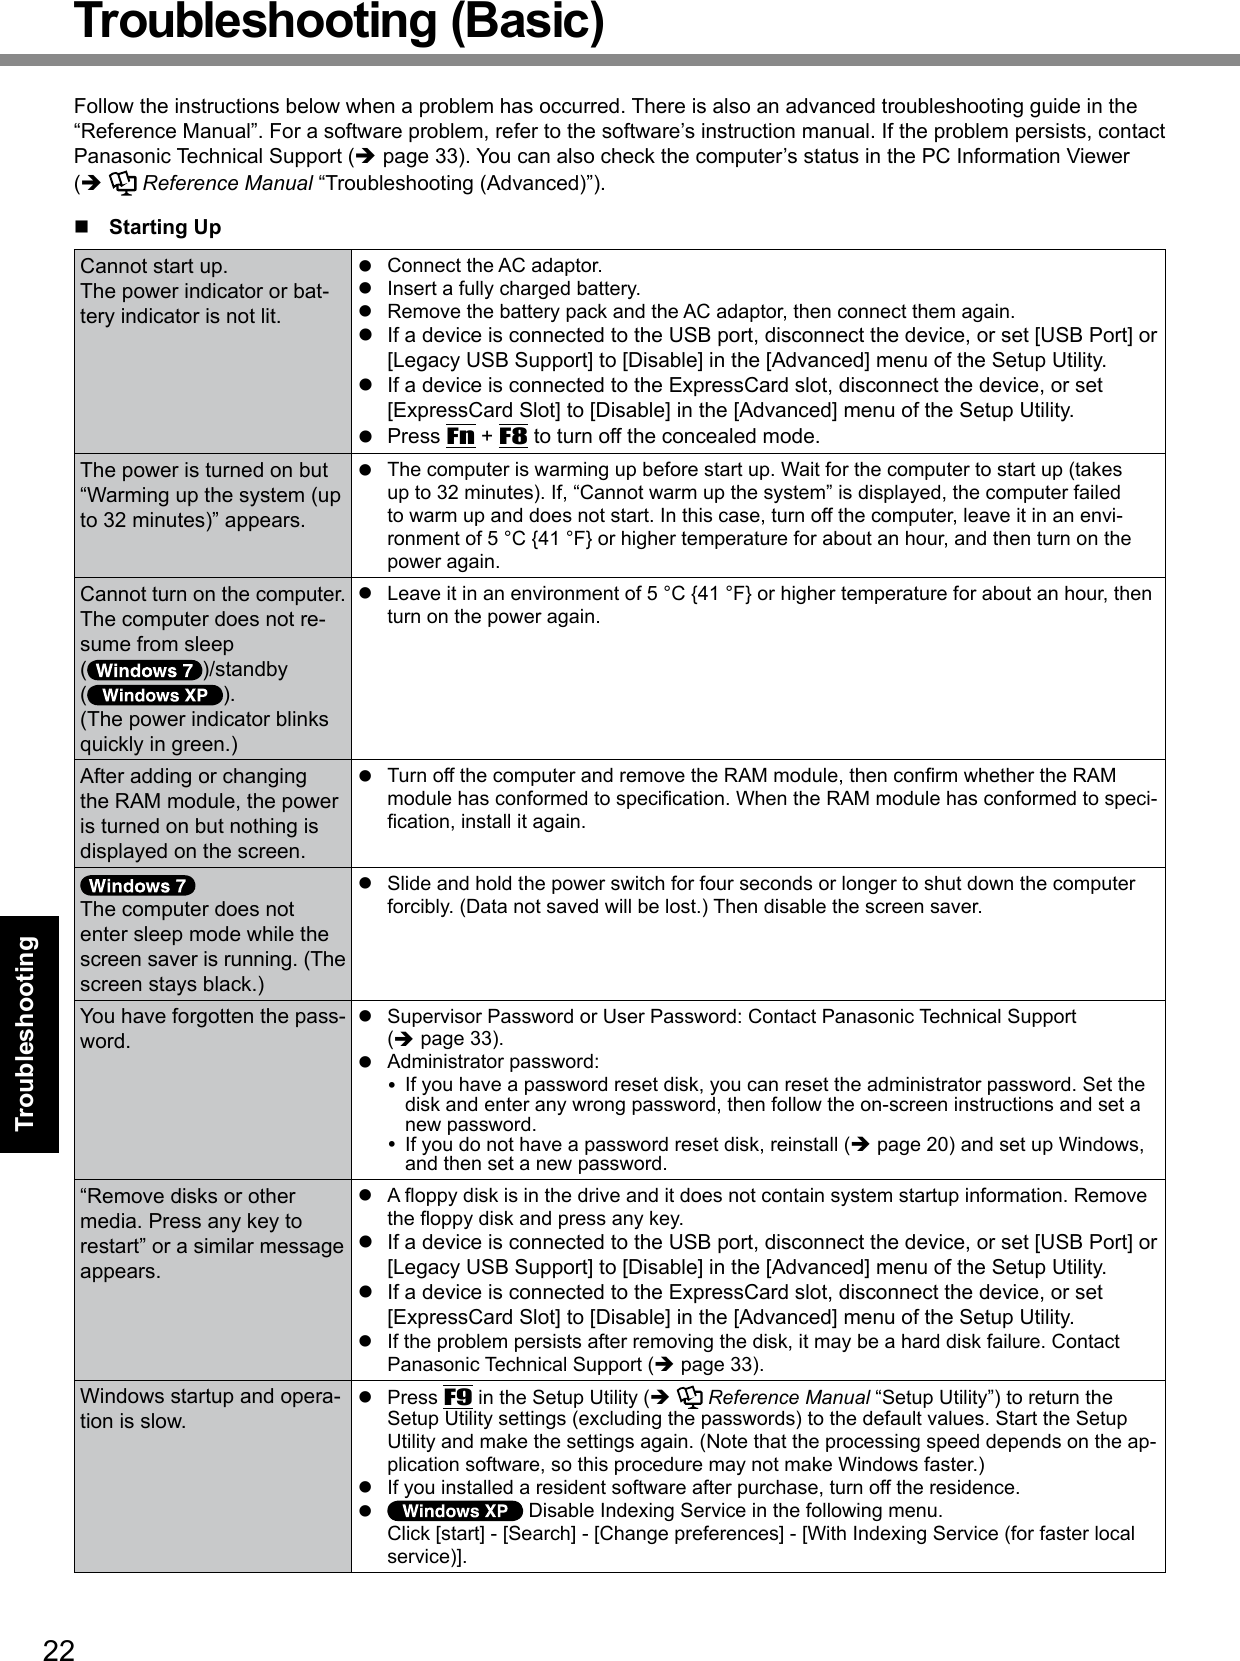 22TroubleshootingTroubleshooting (Basic)Follow the instructions below when a problem has occurred. There is also an advanced troubleshooting guide in the “Reference Manual”. For a software problem, refer to the software’s instruction manual. If the problem persists, contact Panasonic Technical Support (è page 33). You can also check the computer’s status in the PC Information Viewer  (è   Reference Manual “Troubleshooting (Advanced)”).n  Starting UpCannot start up.The power indicator or bat-tery indicator is not lit.l  Connect the AC adaptor.l  Insert a fully charged battery.l  Remove the battery pack and the AC adaptor, then connect them again. l  If a device is connected to the USB port, disconnect the device, or set [USB Port] or [Legacy USB Support] to [Disable] in the [Advanced] menu of the Setup Utility.l  If a device is connected to the ExpressCard slot, disconnect the device, or set [ExpressCard Slot] to [Disable] in the [Advanced] menu of the Setup Utility.l  Press Fn + F8 to turn off the concealed mode.The power is turned on but “Warming up the system (up to 32 minutes)” appears.l  The computer is warming up before start up. Wait for the computer to start up (takes up to 32 minutes). If, “Cannot warm up the system” is displayed, the computer failed to warm up and does not start. In this case, turn off the computer, leave it in an envi-ronment of 5 °C {41 °F} or higher temperature for about an hour, and then turn on the power again.Cannot turn on the computer.The computer does not re-sume from sleep( )/standby  ( ).(The power indicator blinks quickly in green.)l  Leave it in an environment of 5 °C {41 °F} or higher temperature for about an hour, then turn on the power again.After adding or changing the RAM module, the power is turned on but nothing is displayed on the screen.l TurnoffthecomputerandremovetheRAMmodule,thenconrmwhethertheRAMmodulehasconformedtospecication.WhentheRAMmodulehasconformedtospeci-cation,installitagain.The computer does not enter sleep mode while the screen saver is running. (The screen stays black.)l  Slide and hold the power switch for four seconds or longer to shut down the computer forcibly. (Data not saved will be lost.) Then disable the screen saver.You have forgotten the pass-word.l  Supervisor Password or User Password: Contact Panasonic Technical Support  (è page 33).l  Administrator password:   If you have a password reset disk, you can reset the administrator password. Set the disk and enter any wrong password, then follow the on-screen instructions and set a new password.  If you do not have a password reset disk, reinstall (è page 20) and set up Windows, and then set a new password.“Remove disks or other media. Press any key to restart” or a similar message appears.l Aoppydiskisinthedriveanditdoesnotcontainsystemstartupinformation.Removetheoppydiskandpressanykey.l  If a device is connected to the USB port, disconnect the device, or set [USB Port] or [Legacy USB Support] to [Disable] in the [Advanced] menu of the Setup Utility.l  If a device is connected to the ExpressCard slot, disconnect the device, or set [ExpressCard Slot] to [Disable] in the [Advanced] menu of the Setup Utility.l  If the problem persists after removing the disk, it may be a hard disk failure. Contact Panasonic Technical Support (è page 33).Windows startup and opera-tion is slow.l  Press F9 in the Setup Utility (è   Reference Manual “Setup Utility”) to return the Setup Utility settings (excluding the passwords) to the default values. Start the Setup Utility and make the settings again. (Note that the processing speed depends on the ap-plication software, so this procedure may not make Windows faster.)l  If you installed a resident software after purchase, turn off the residence.l   Disable Indexing Service in the following menu. Click [start] - [Search] - [Change preferences] - [With Indexing Service (for faster local service)].